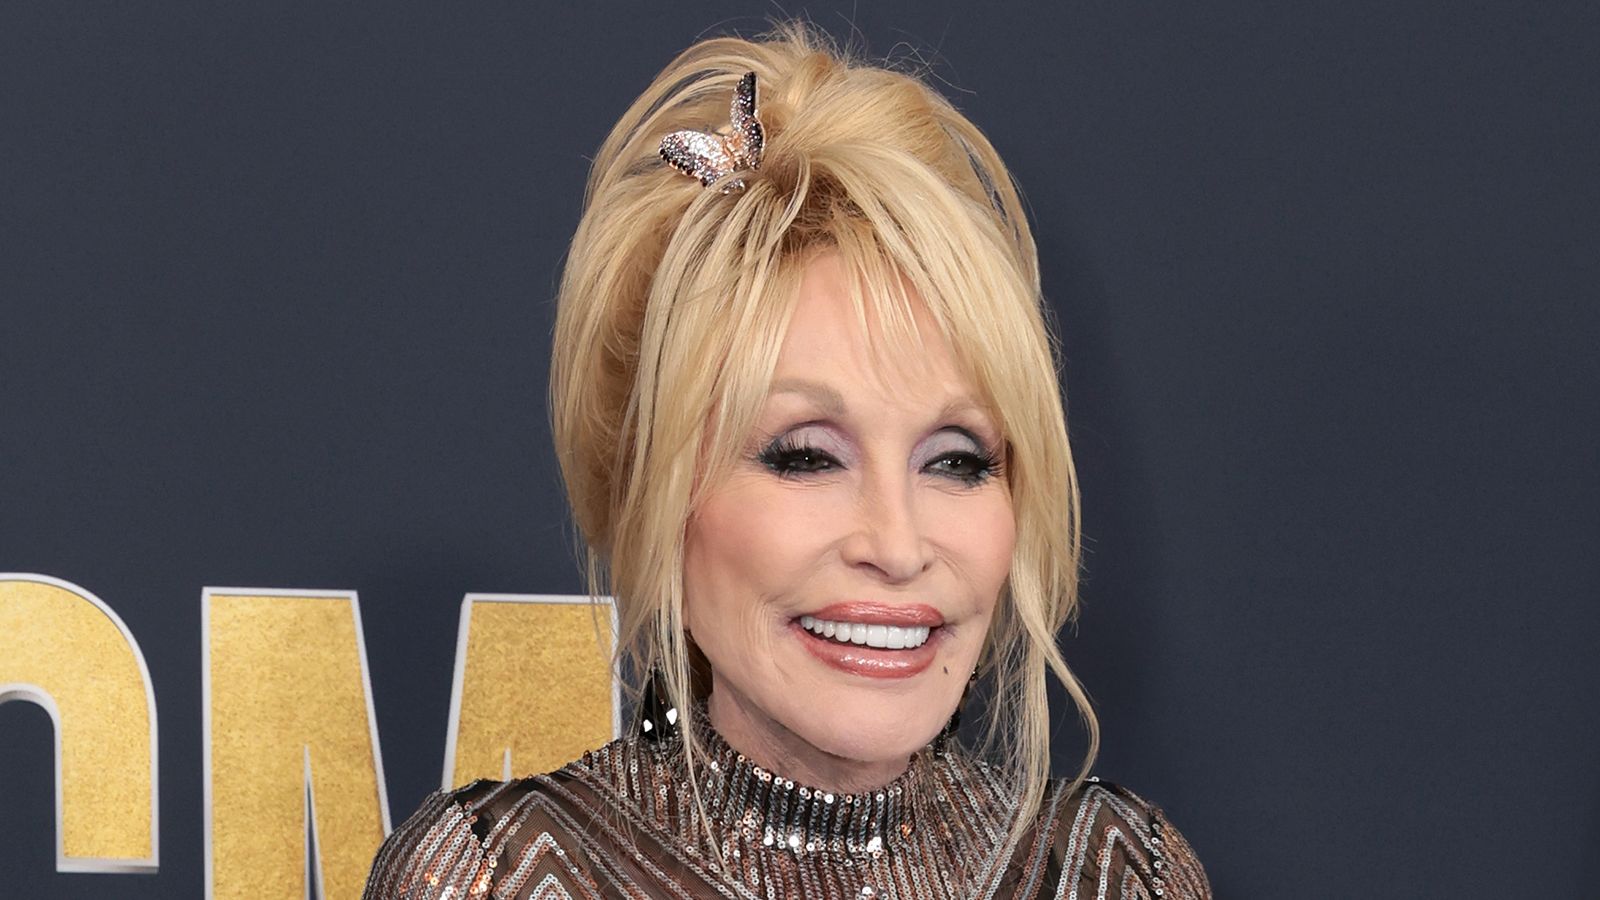 Dolly Parton on style, stardom and sexists: 'I know how to push